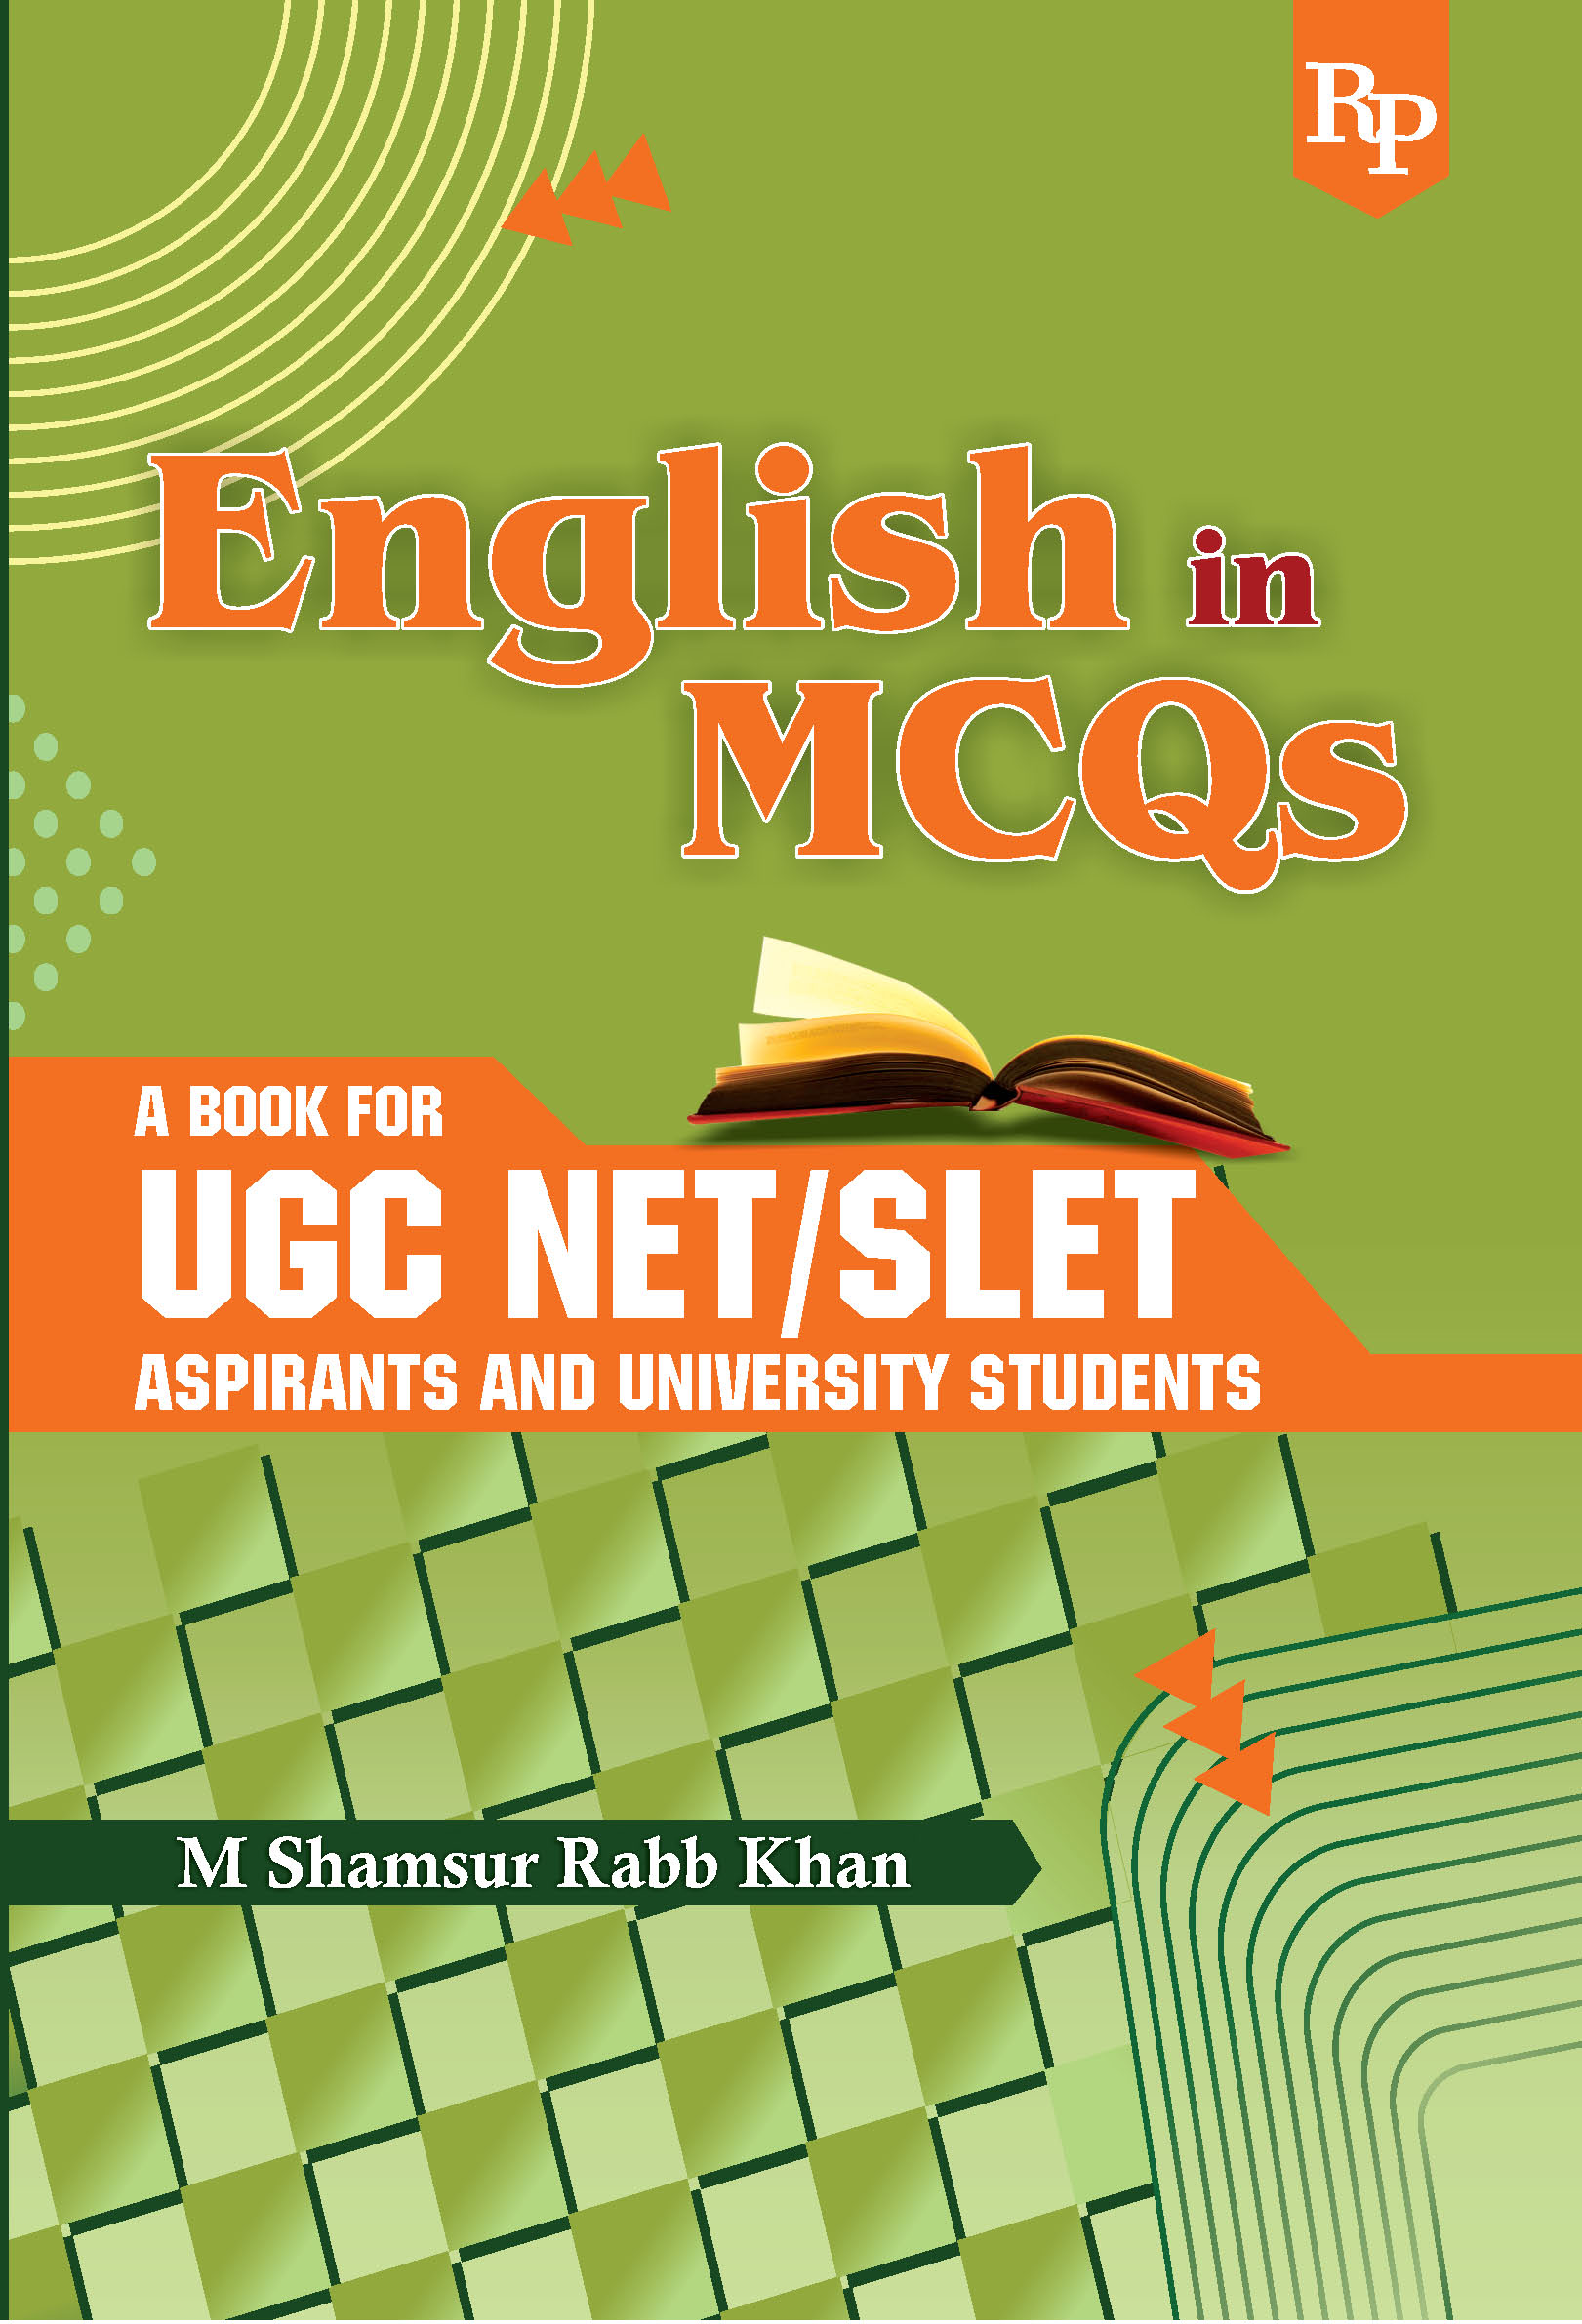 English in MCQs: A Book for UGC NET/SLET Aspirants and University Students